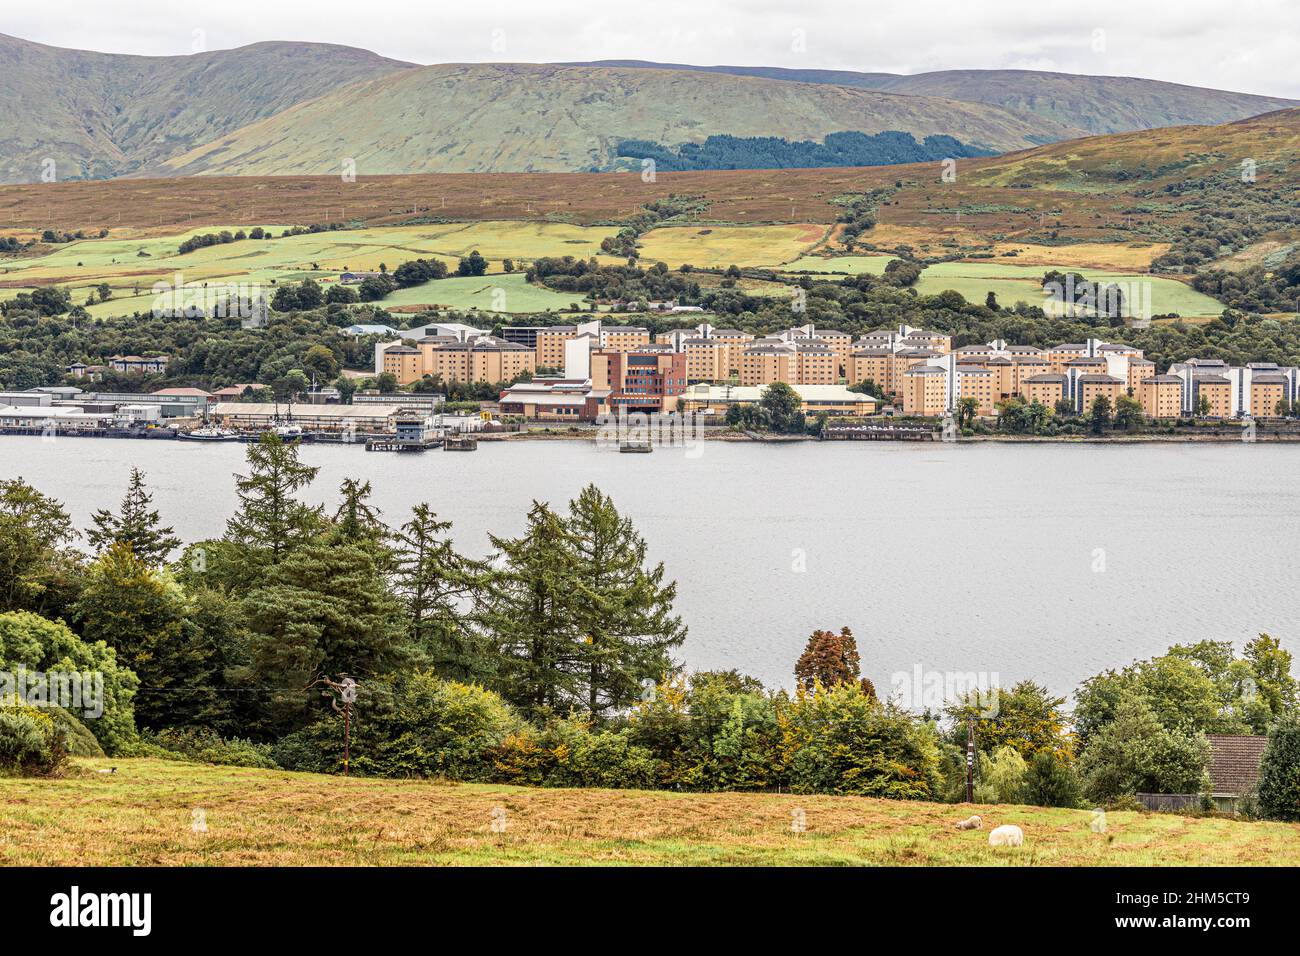 The accommodation buildings for HMNB Clyde nuclear submarine base beside Gare Loch at Faslane, Argyll & Bute, Scotland UK Stock Photo